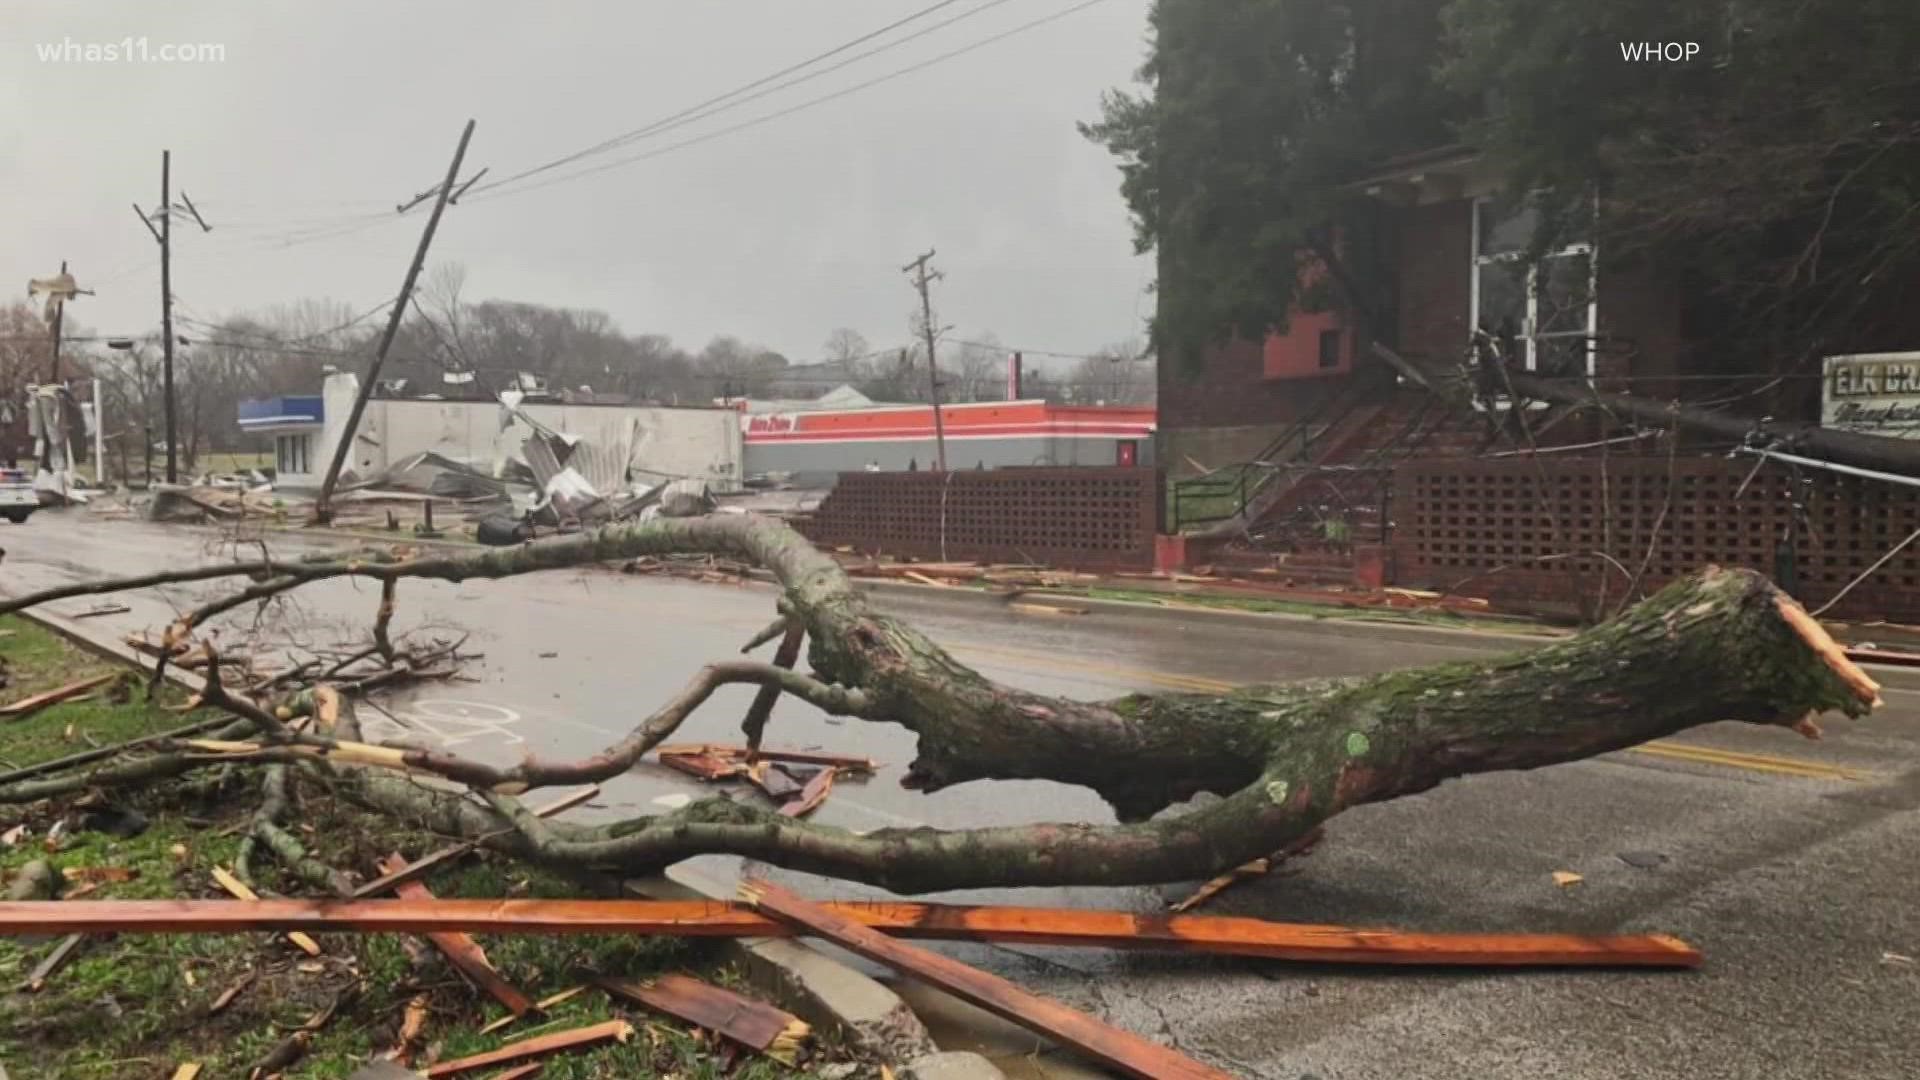 Gov. Beshear declares state of emergency as severe weather moved